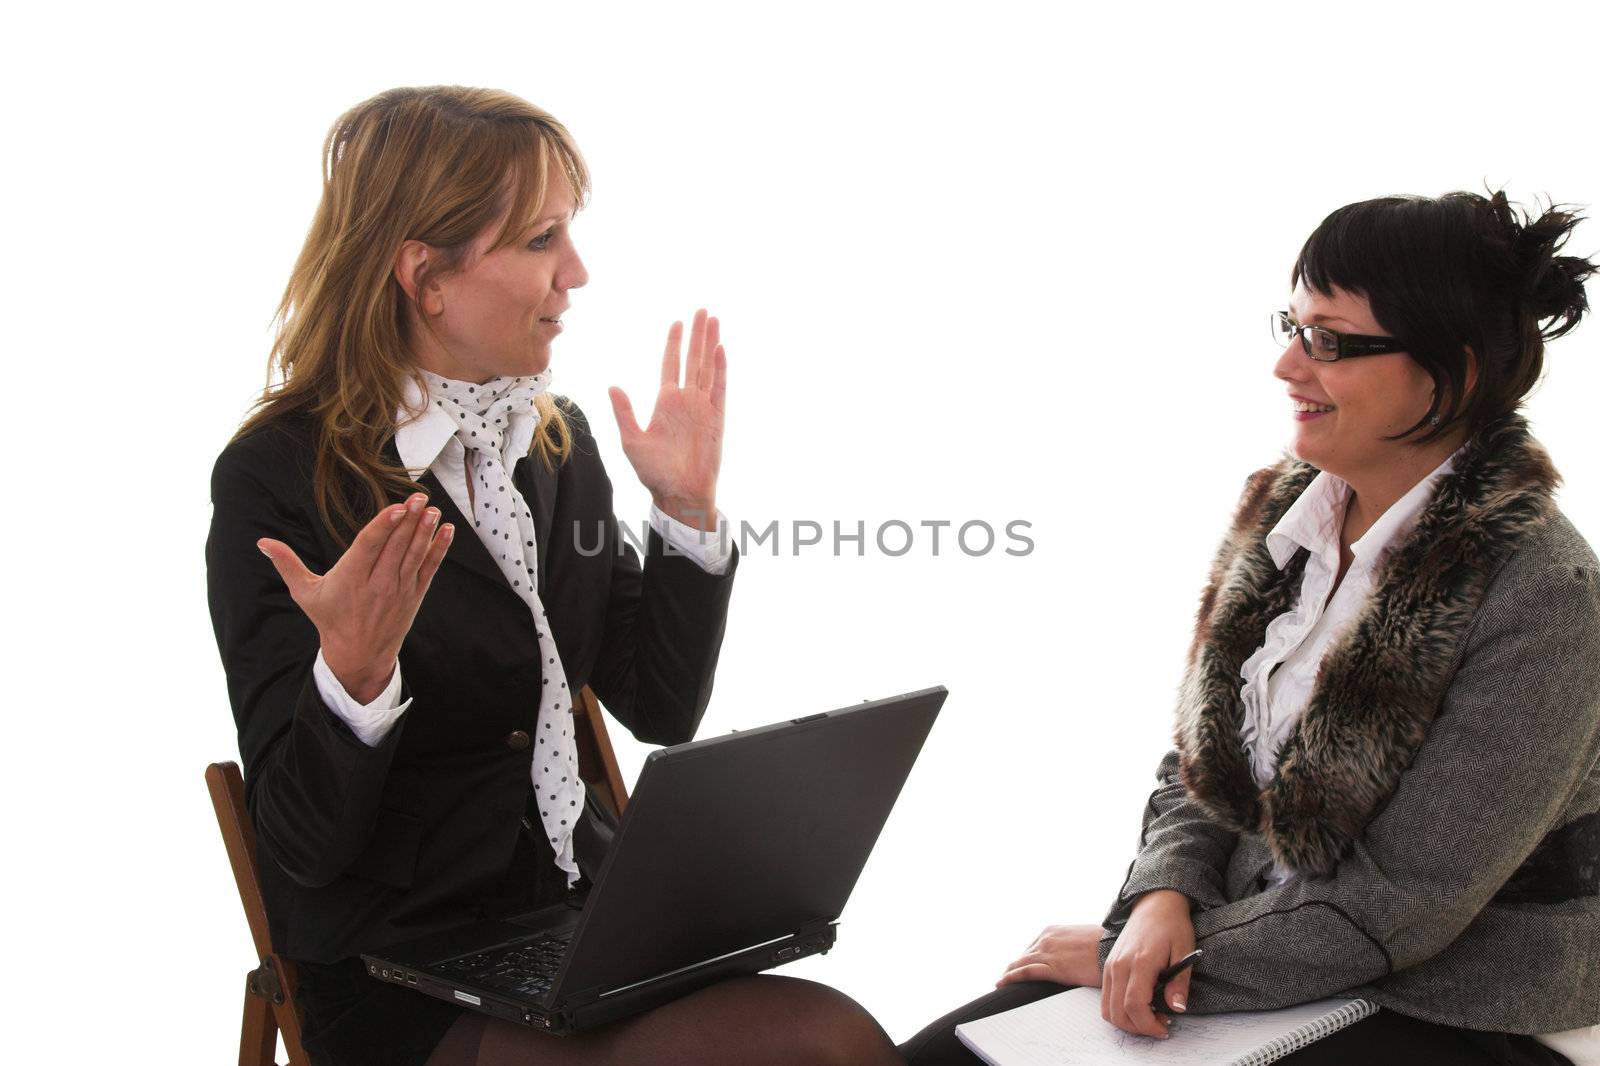 Two business women sitting together with one having a laptop, discussing business